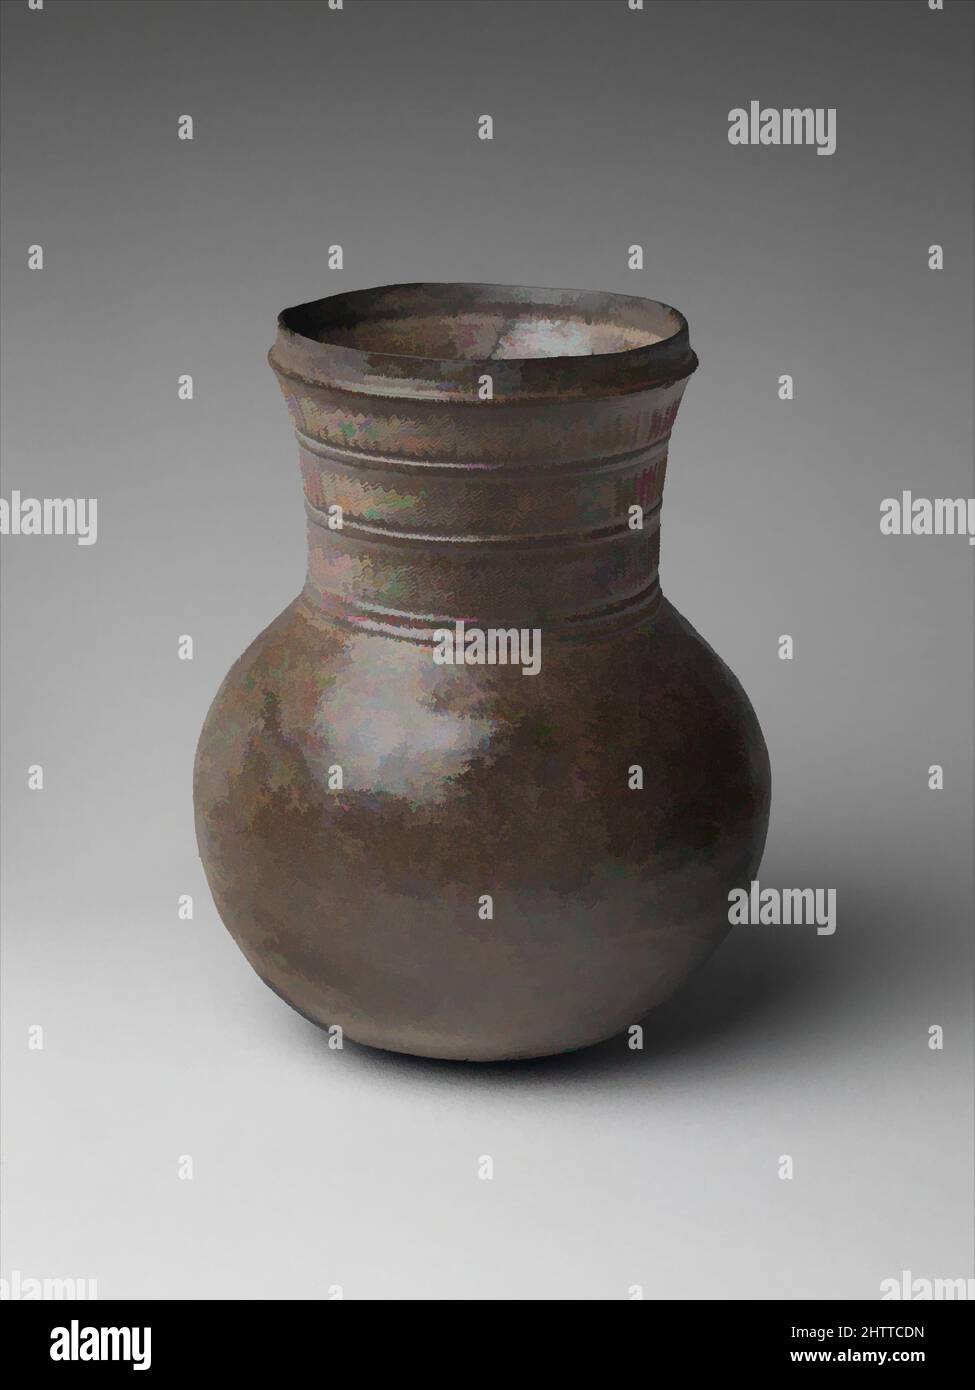 Art inspired by Jar, 긴 목 항아리 삼국, 가야, Three Kingdoms pd. (57 BC–AD 668) Gaya federation, Great Gaya, 3rd quarter of the 5th century, Korea, Stoneware with accidental ash glaze, H. 6 in. (15.2 cm), Ceramics, Classic works modernized by Artotop with a splash of modernity. Shapes, color and value, eye-catching visual impact on art. Emotions through freedom of artworks in a contemporary way. A timeless message pursuing a wildly creative new direction. Artists turning to the digital medium and creating the Artotop NFT Stock Photo